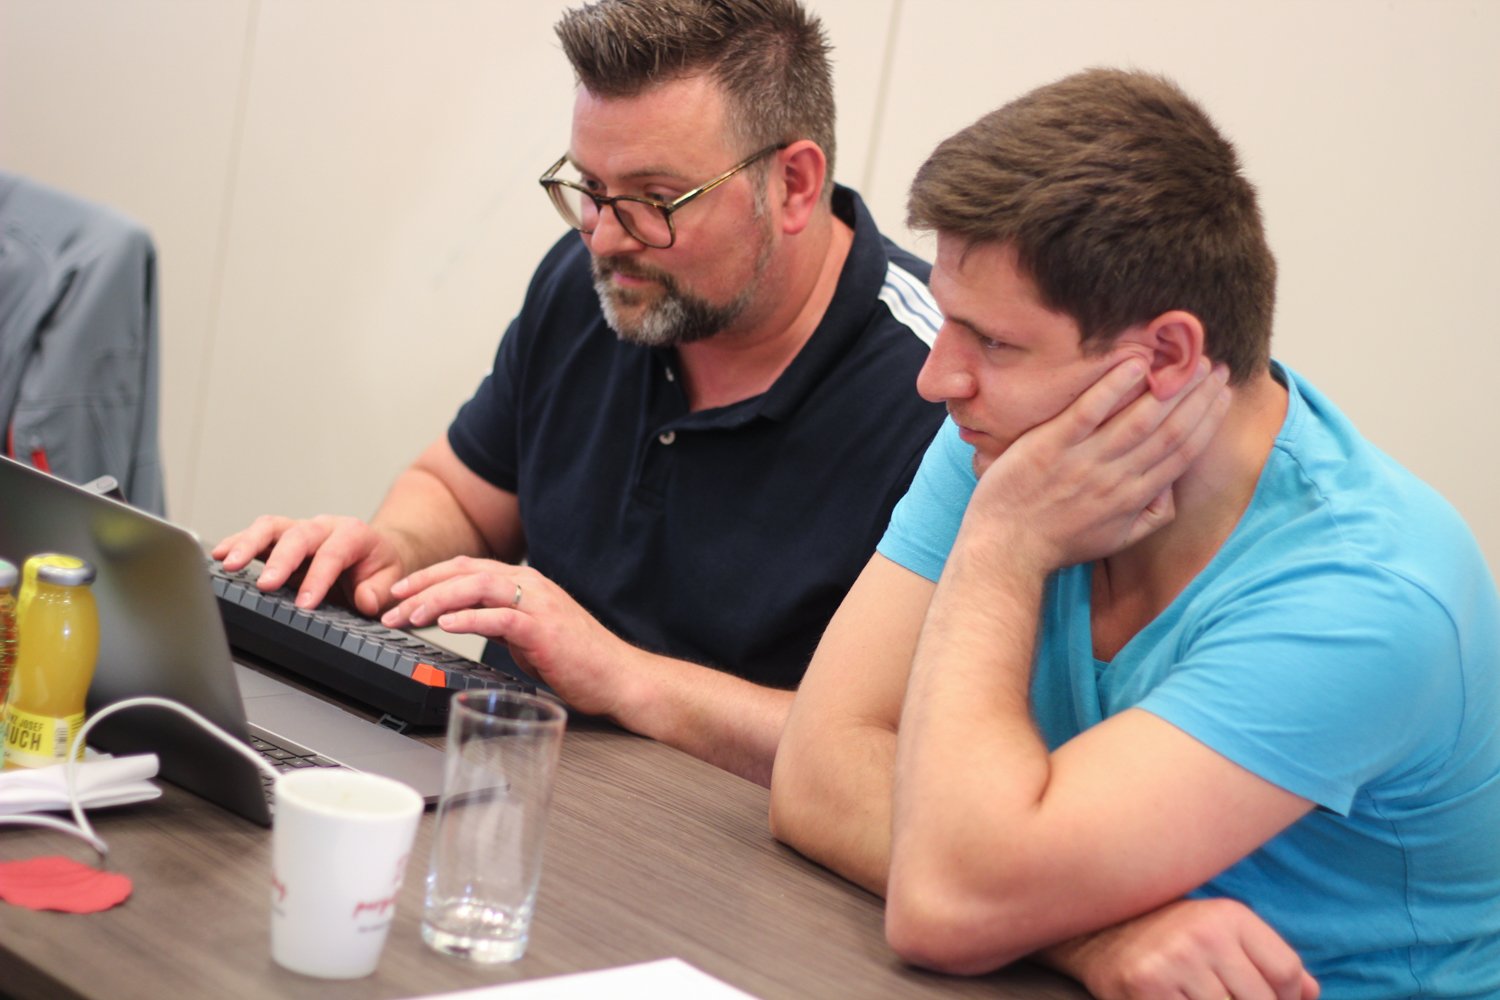 Timon and Krystian sitting next to each other in front of a laptop at a desk during a hackathon